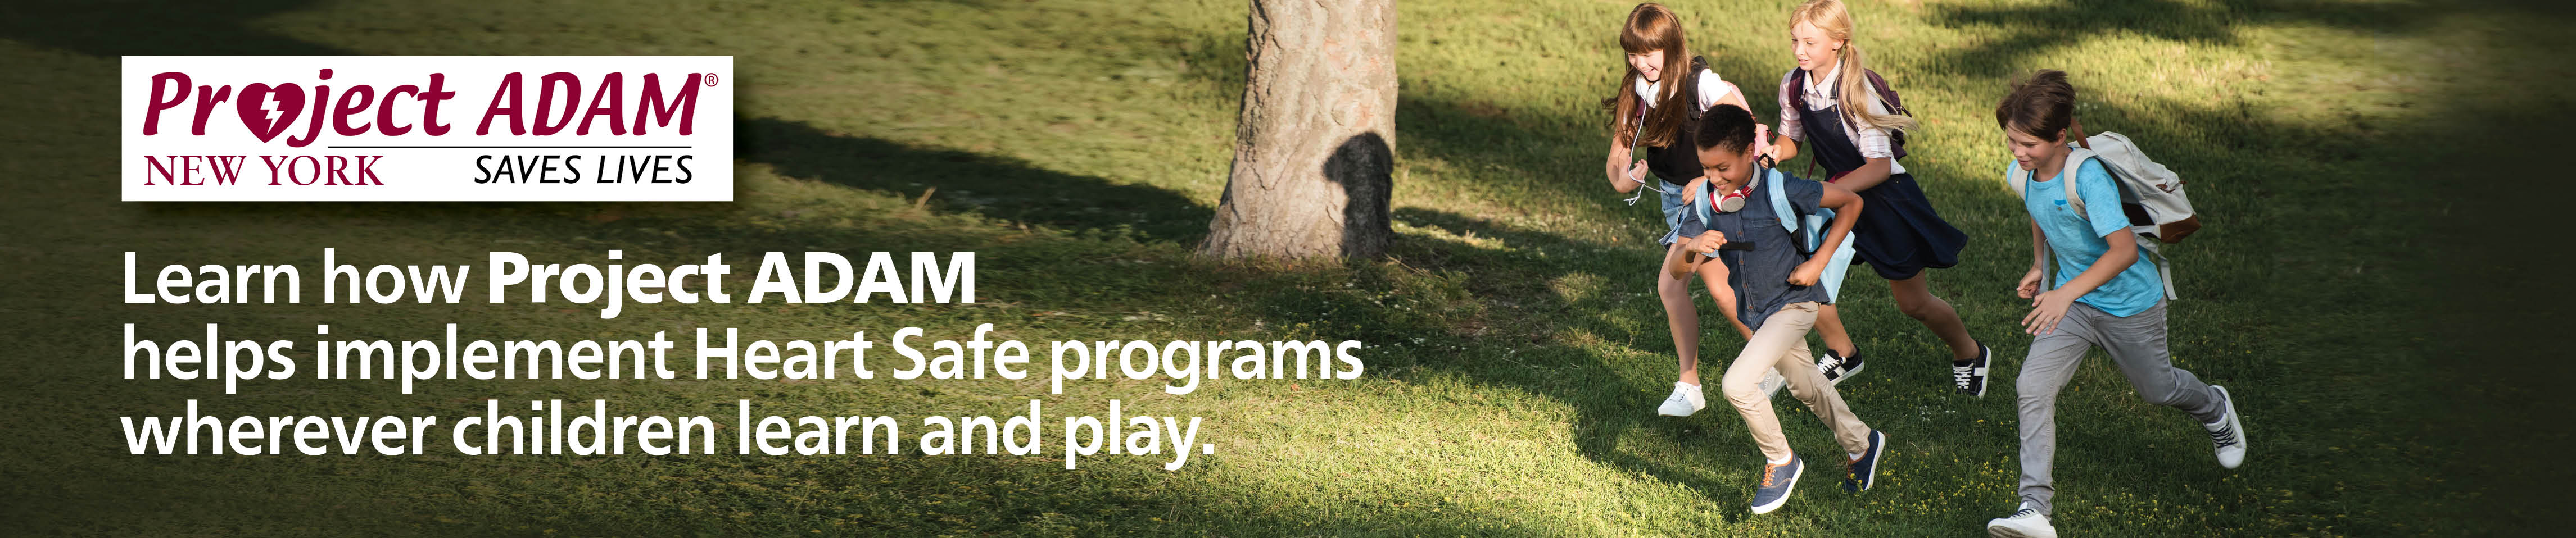 Learn how Project ADAM helps implement Heart Safe programs wherever children learn and play